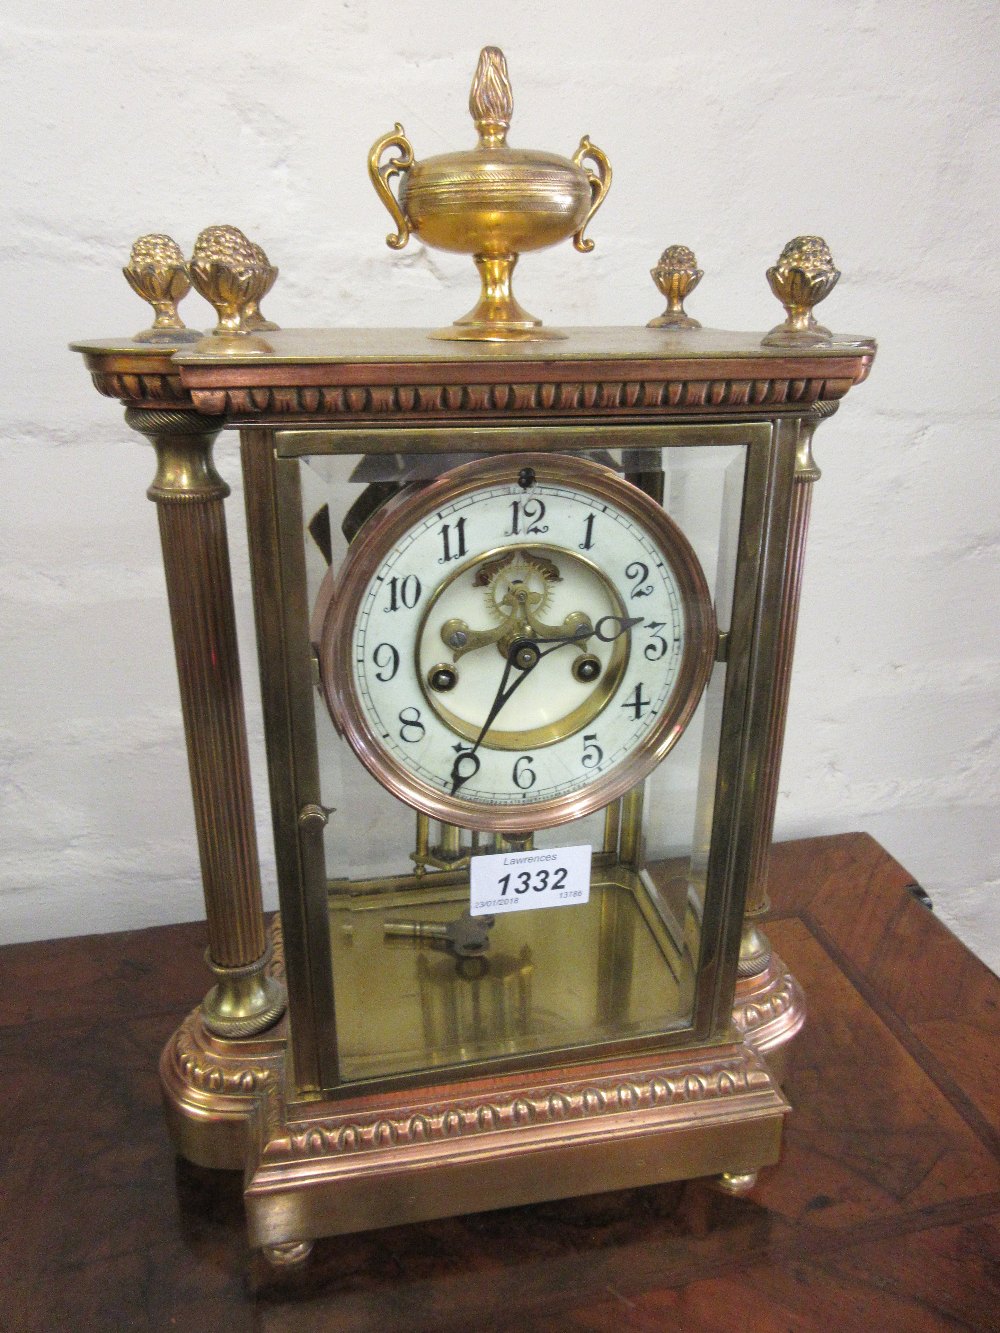 Late 19th or early 20th Century gilt brass four glass library clock with enamel dial,